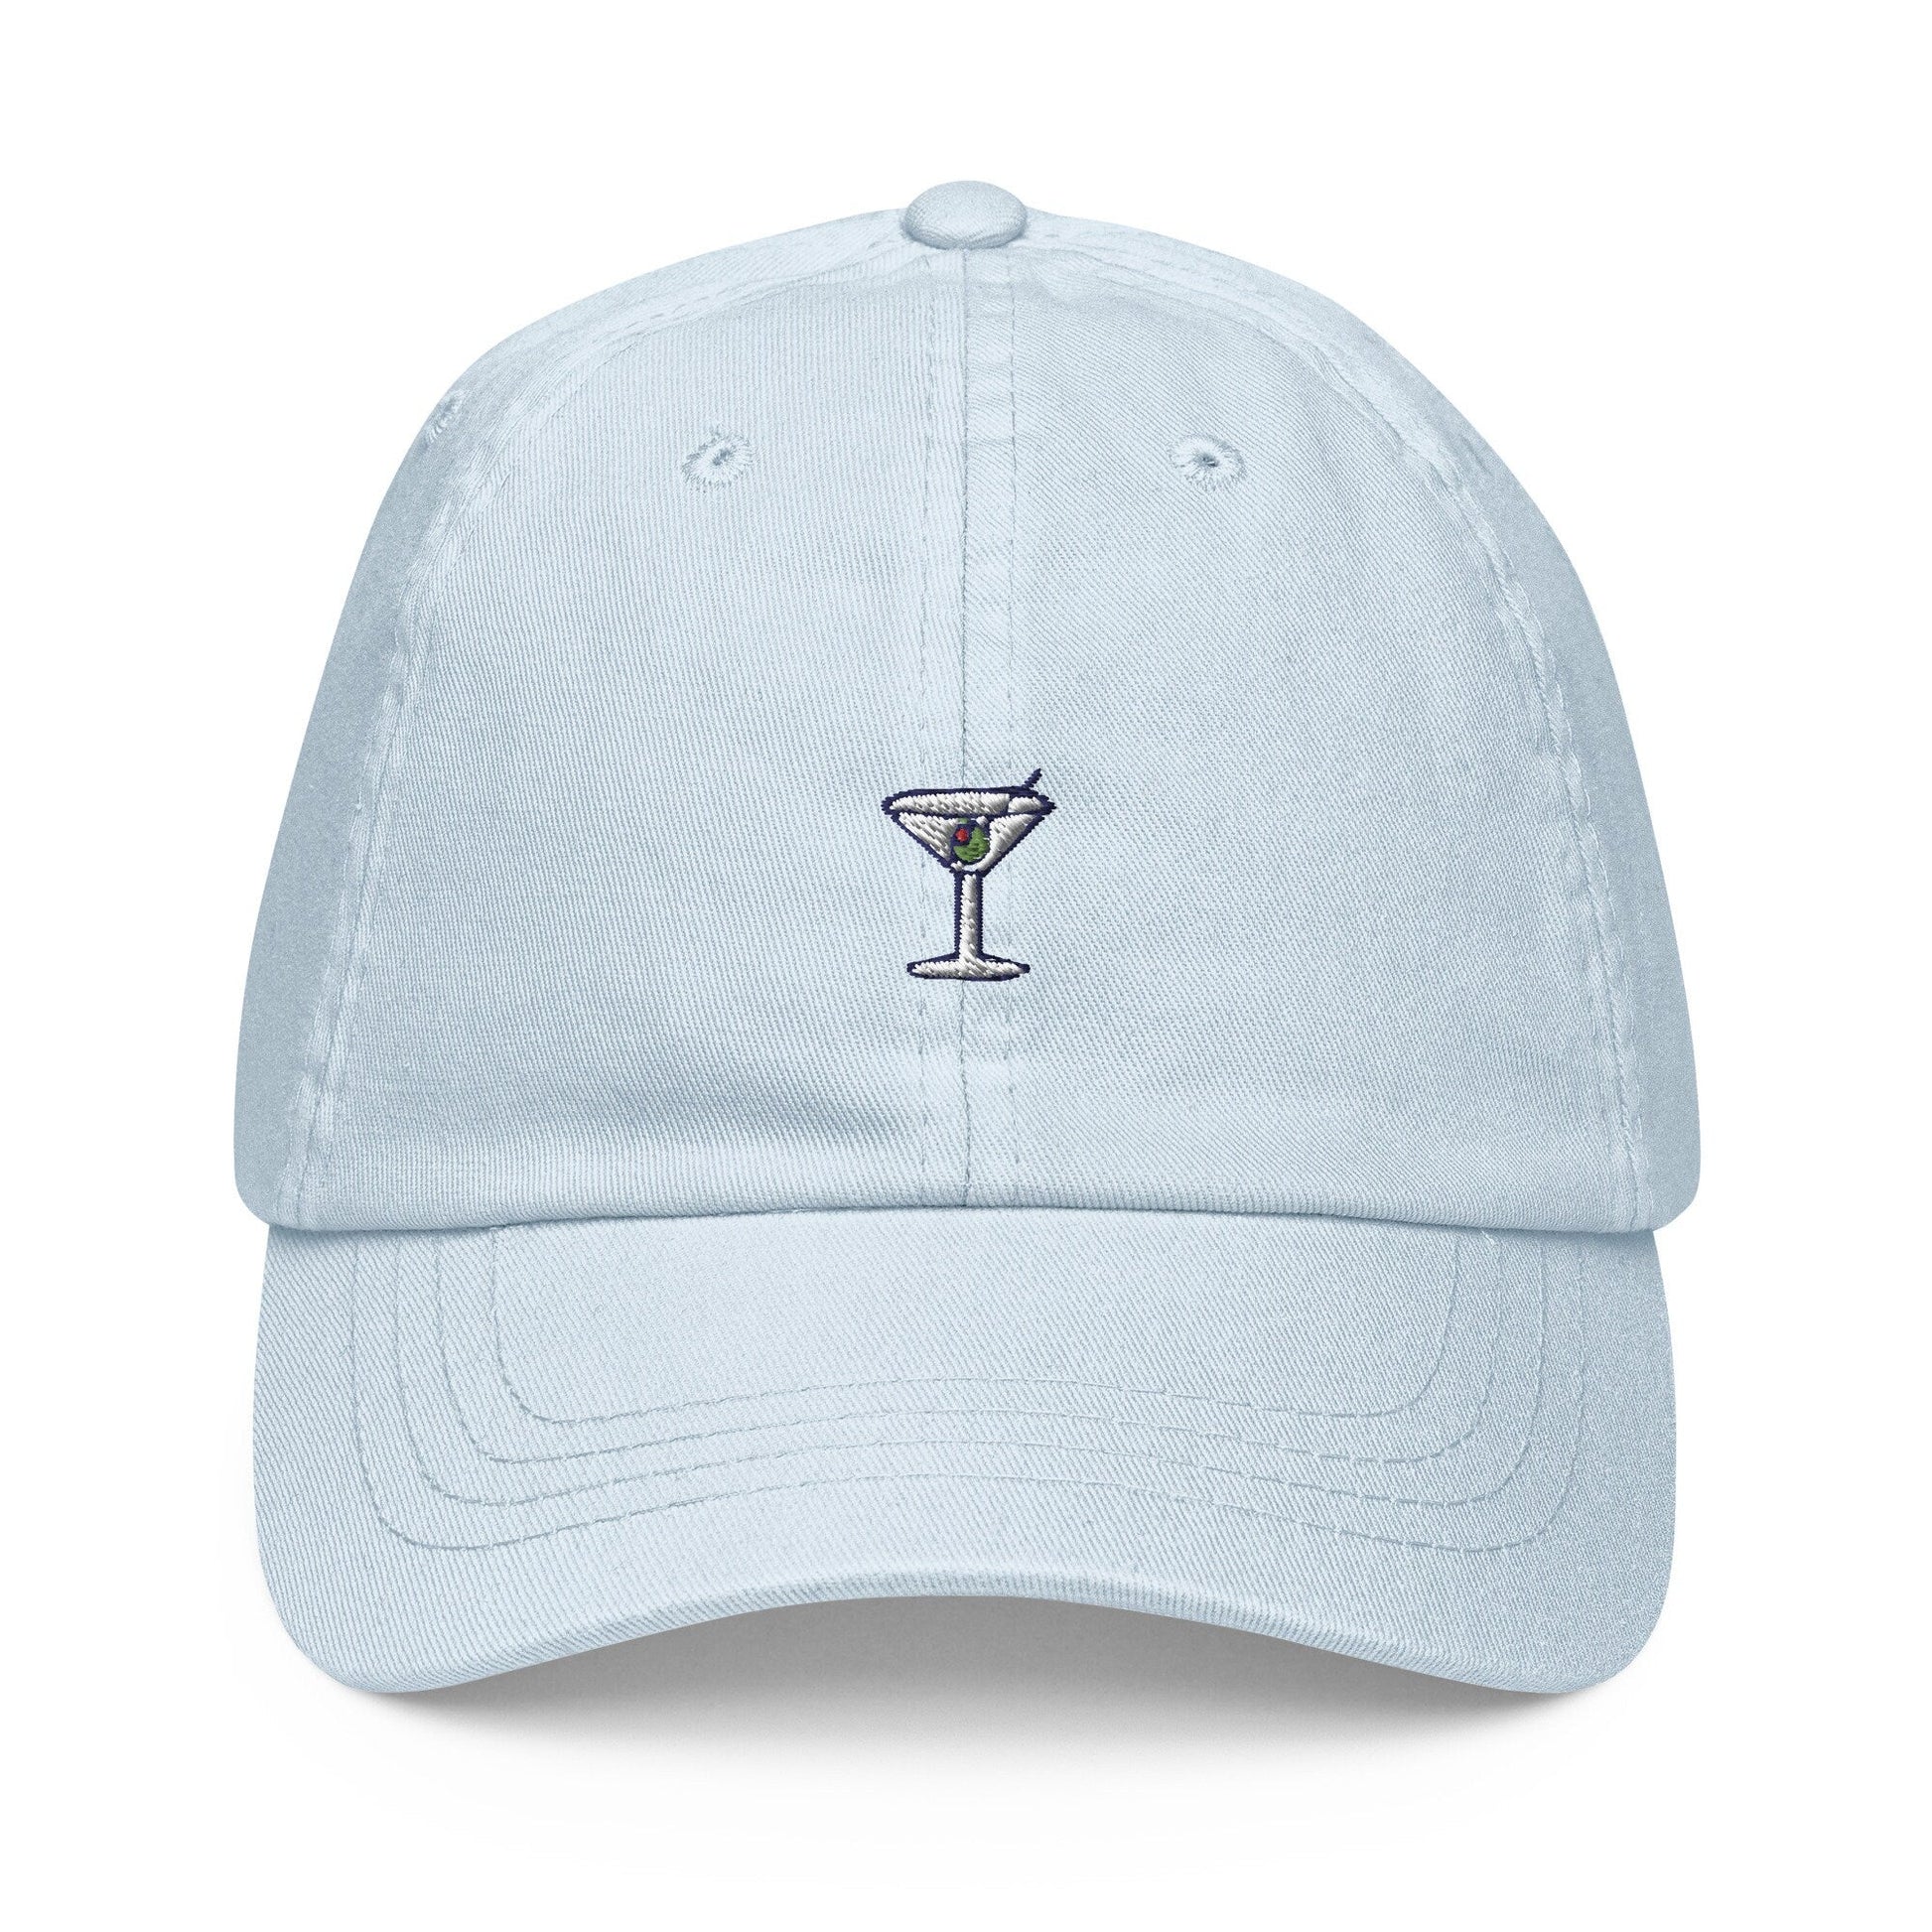 Martini Dad Hat - Gift for vodka gin cocktail lovers - Embroidered Cotton Cap - Evilwater Originals